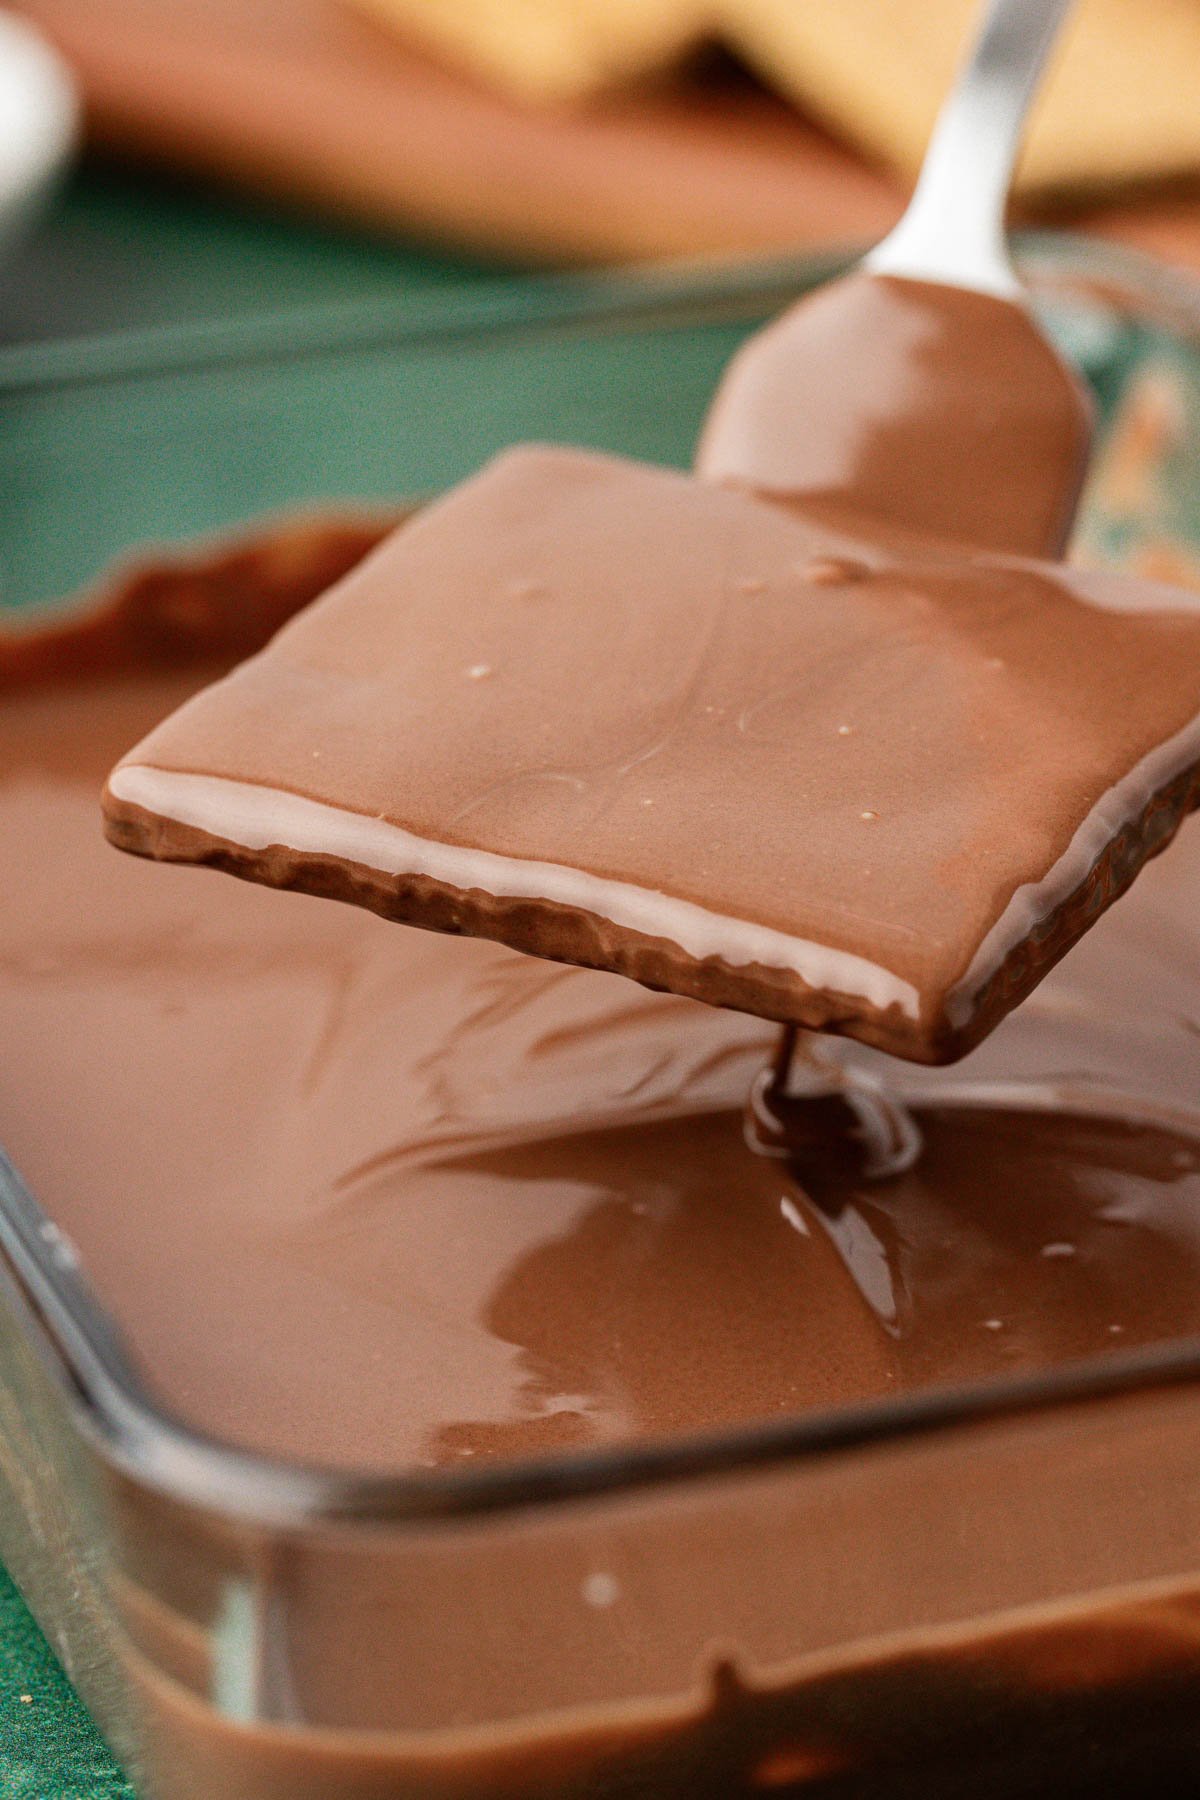 A graham cracker being lifted out of a dish of melted chocolate.